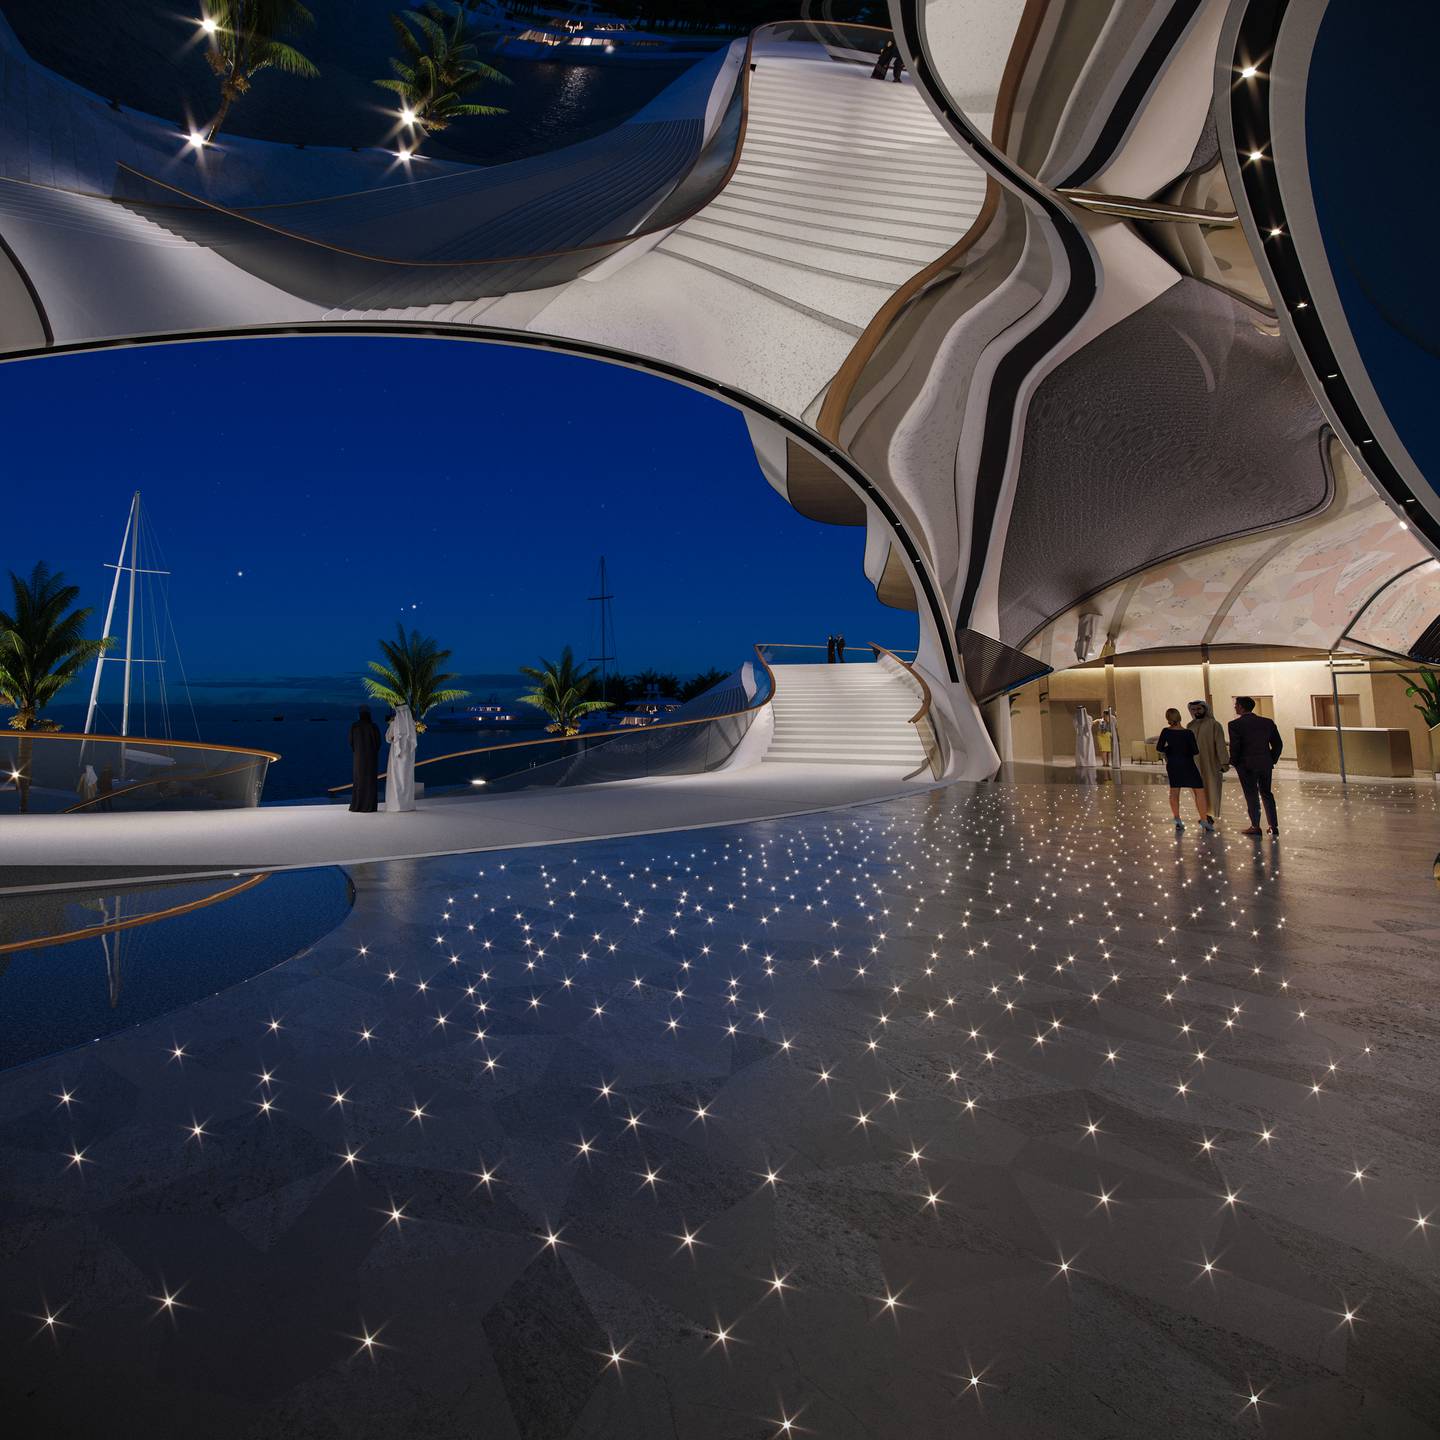 The entrance features a mirrored vaulted ceiling over a star-lit floor. Photo: Amaala